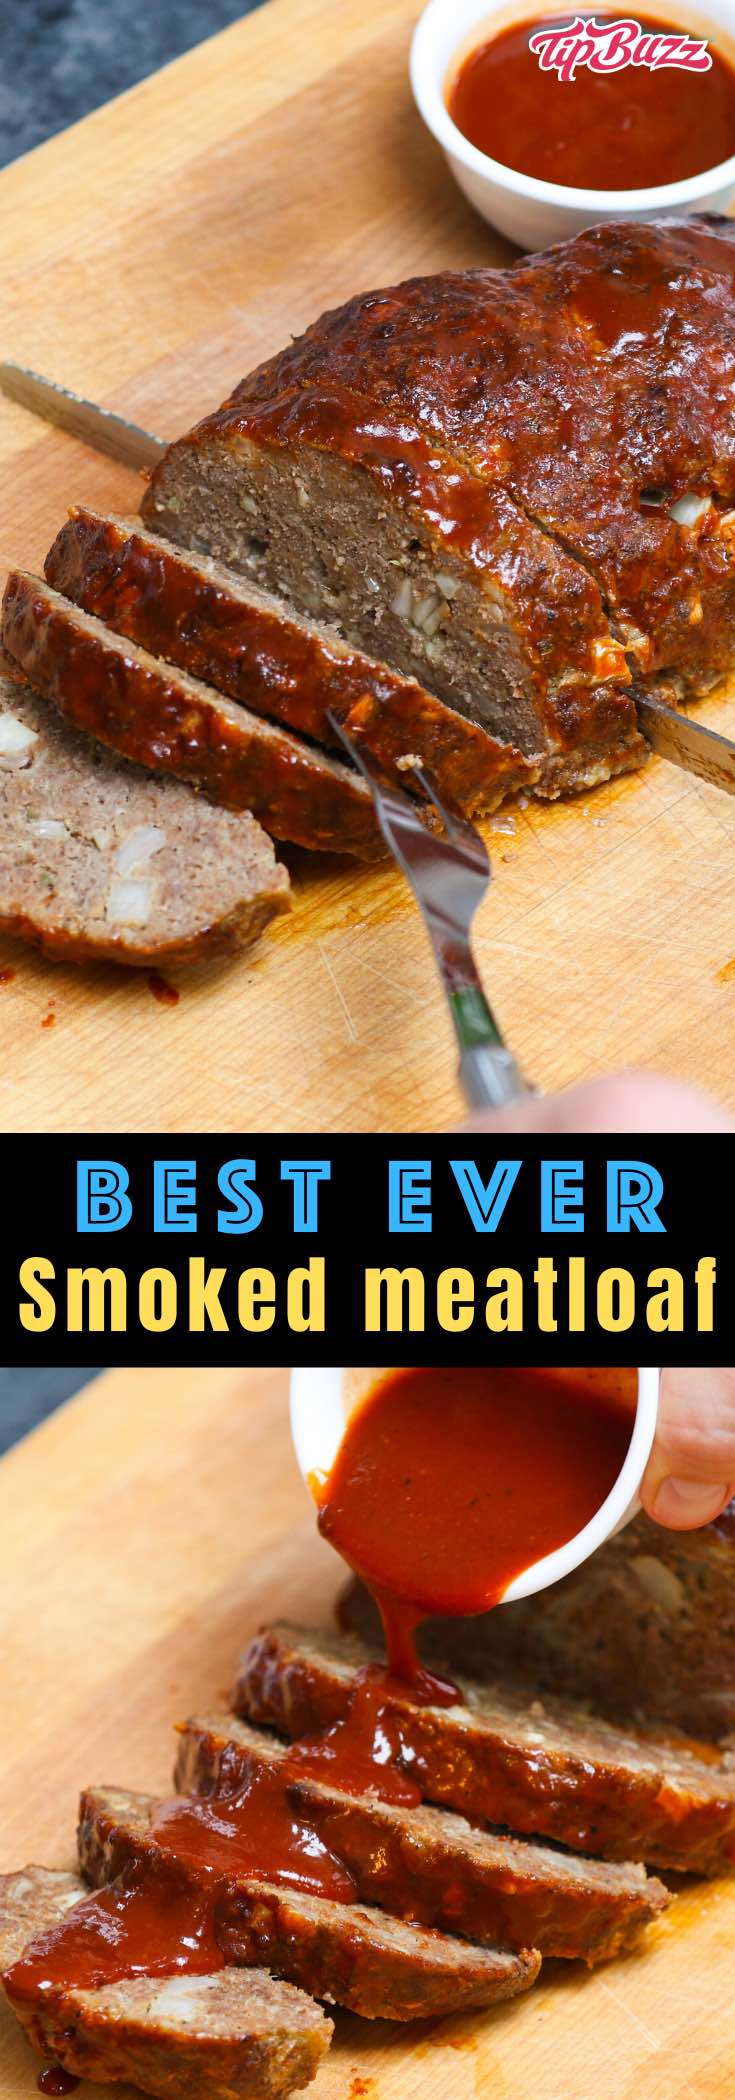 Smoked Meatloaf is a mouthwatering recipe that's easy to make